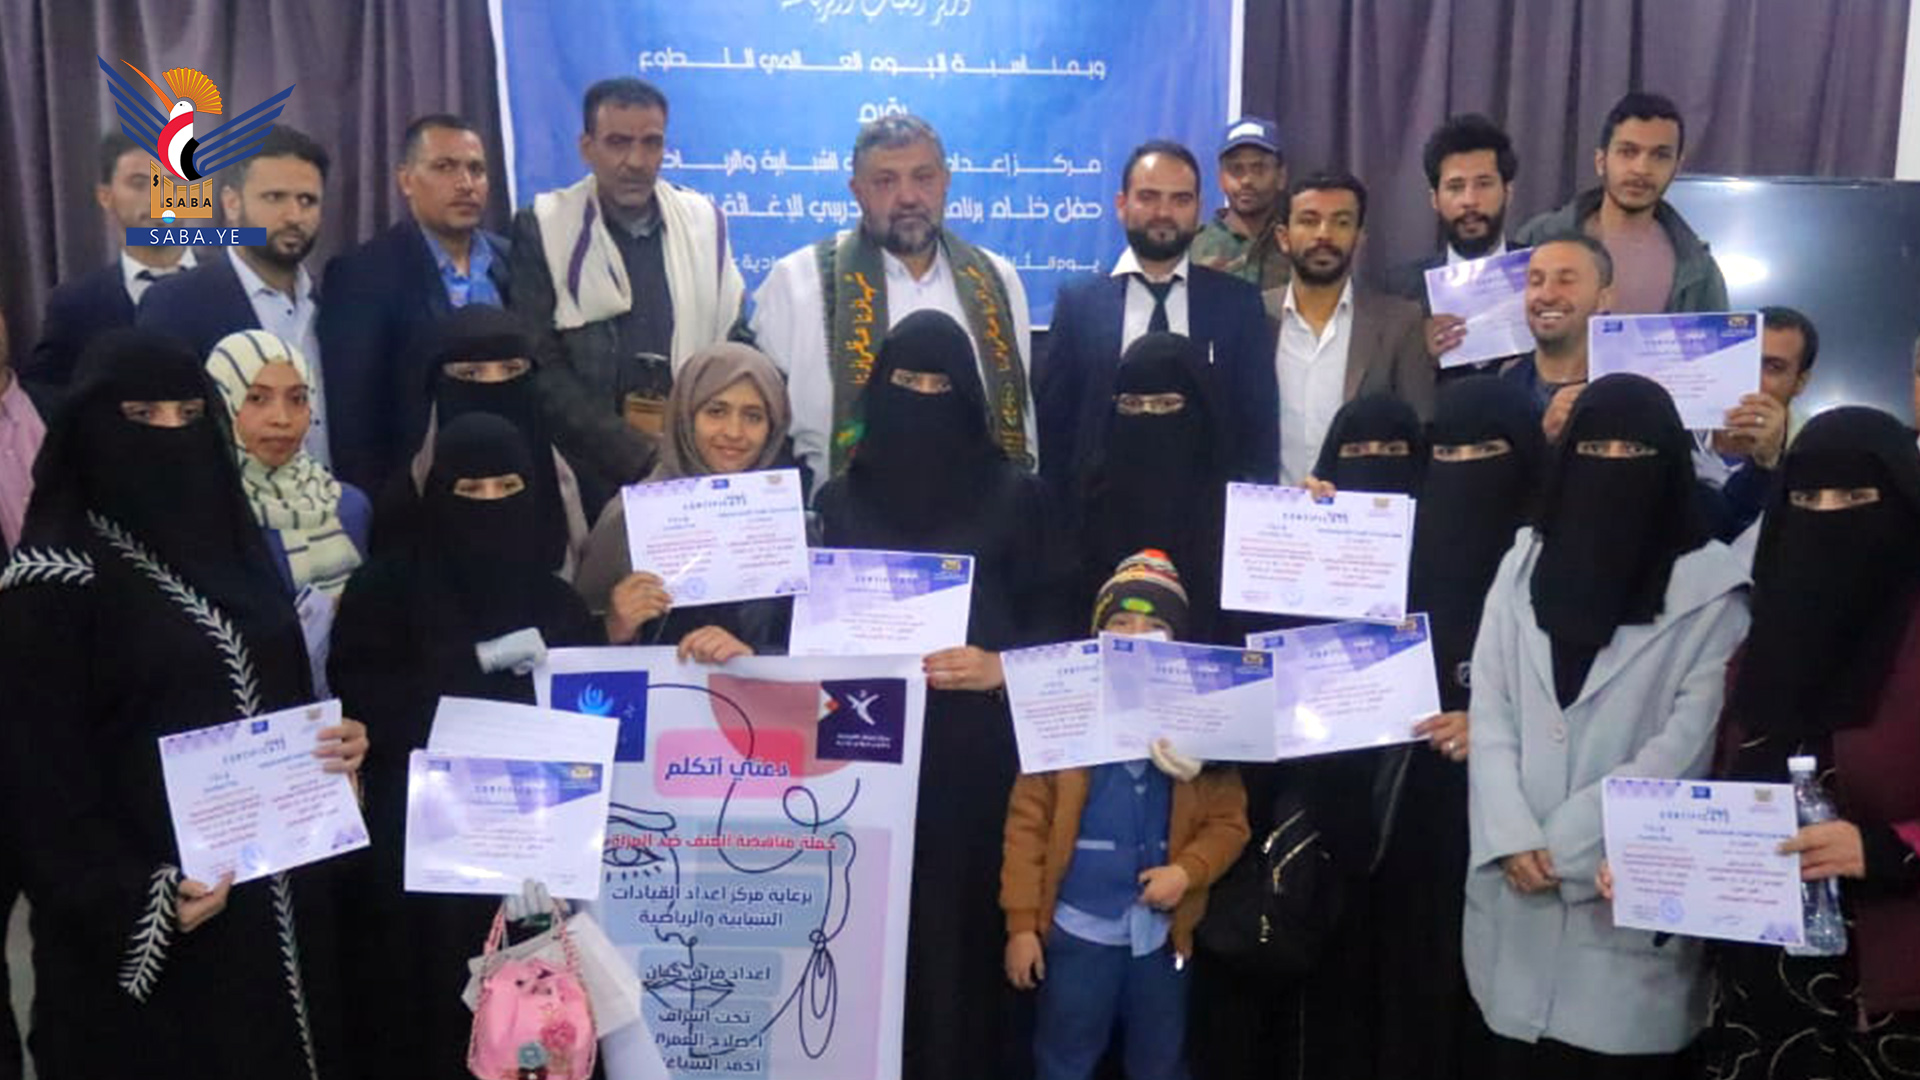 Sphere Training Program for Humanitarian Relief in Sana'a concluded 